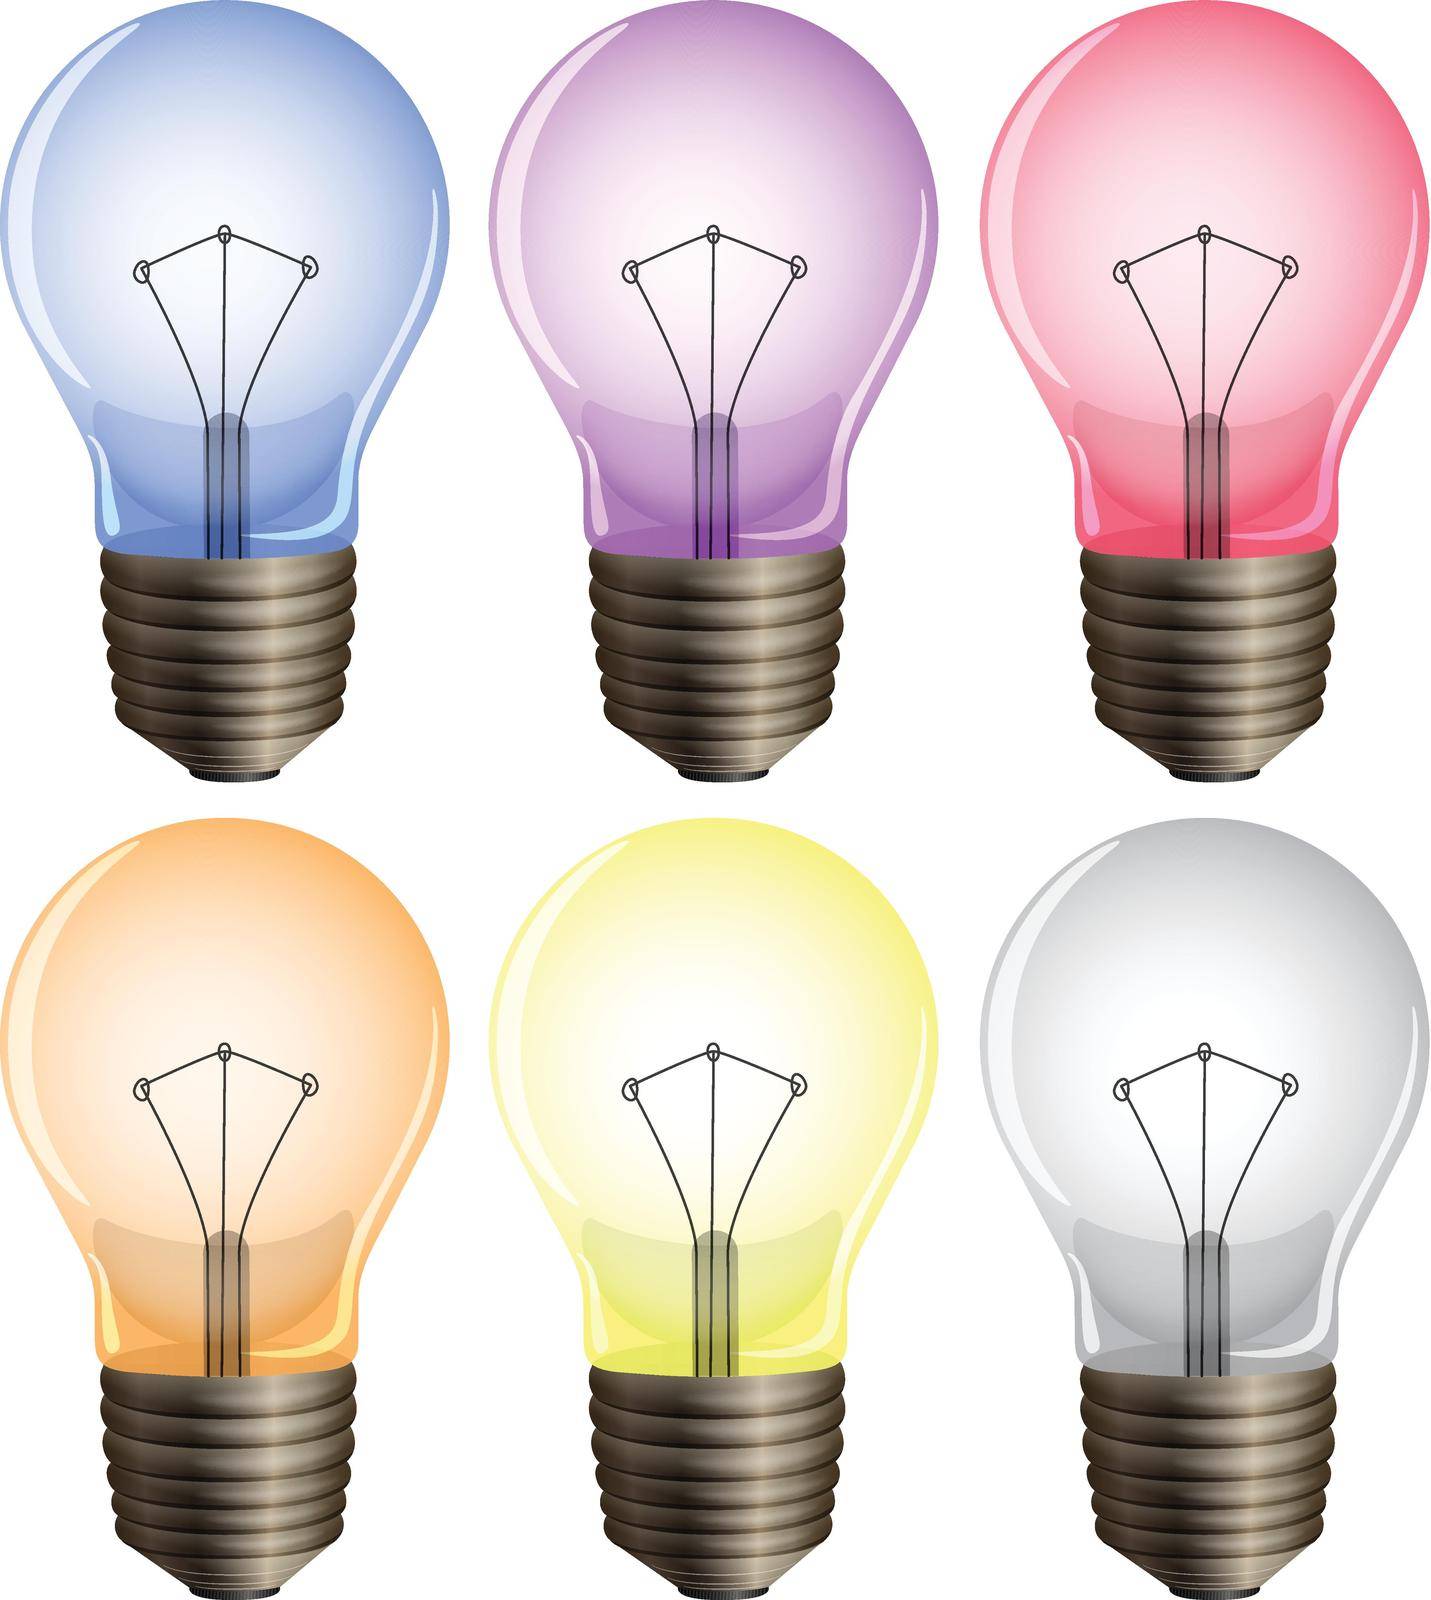 Illustration of the six light bulbs on a white background